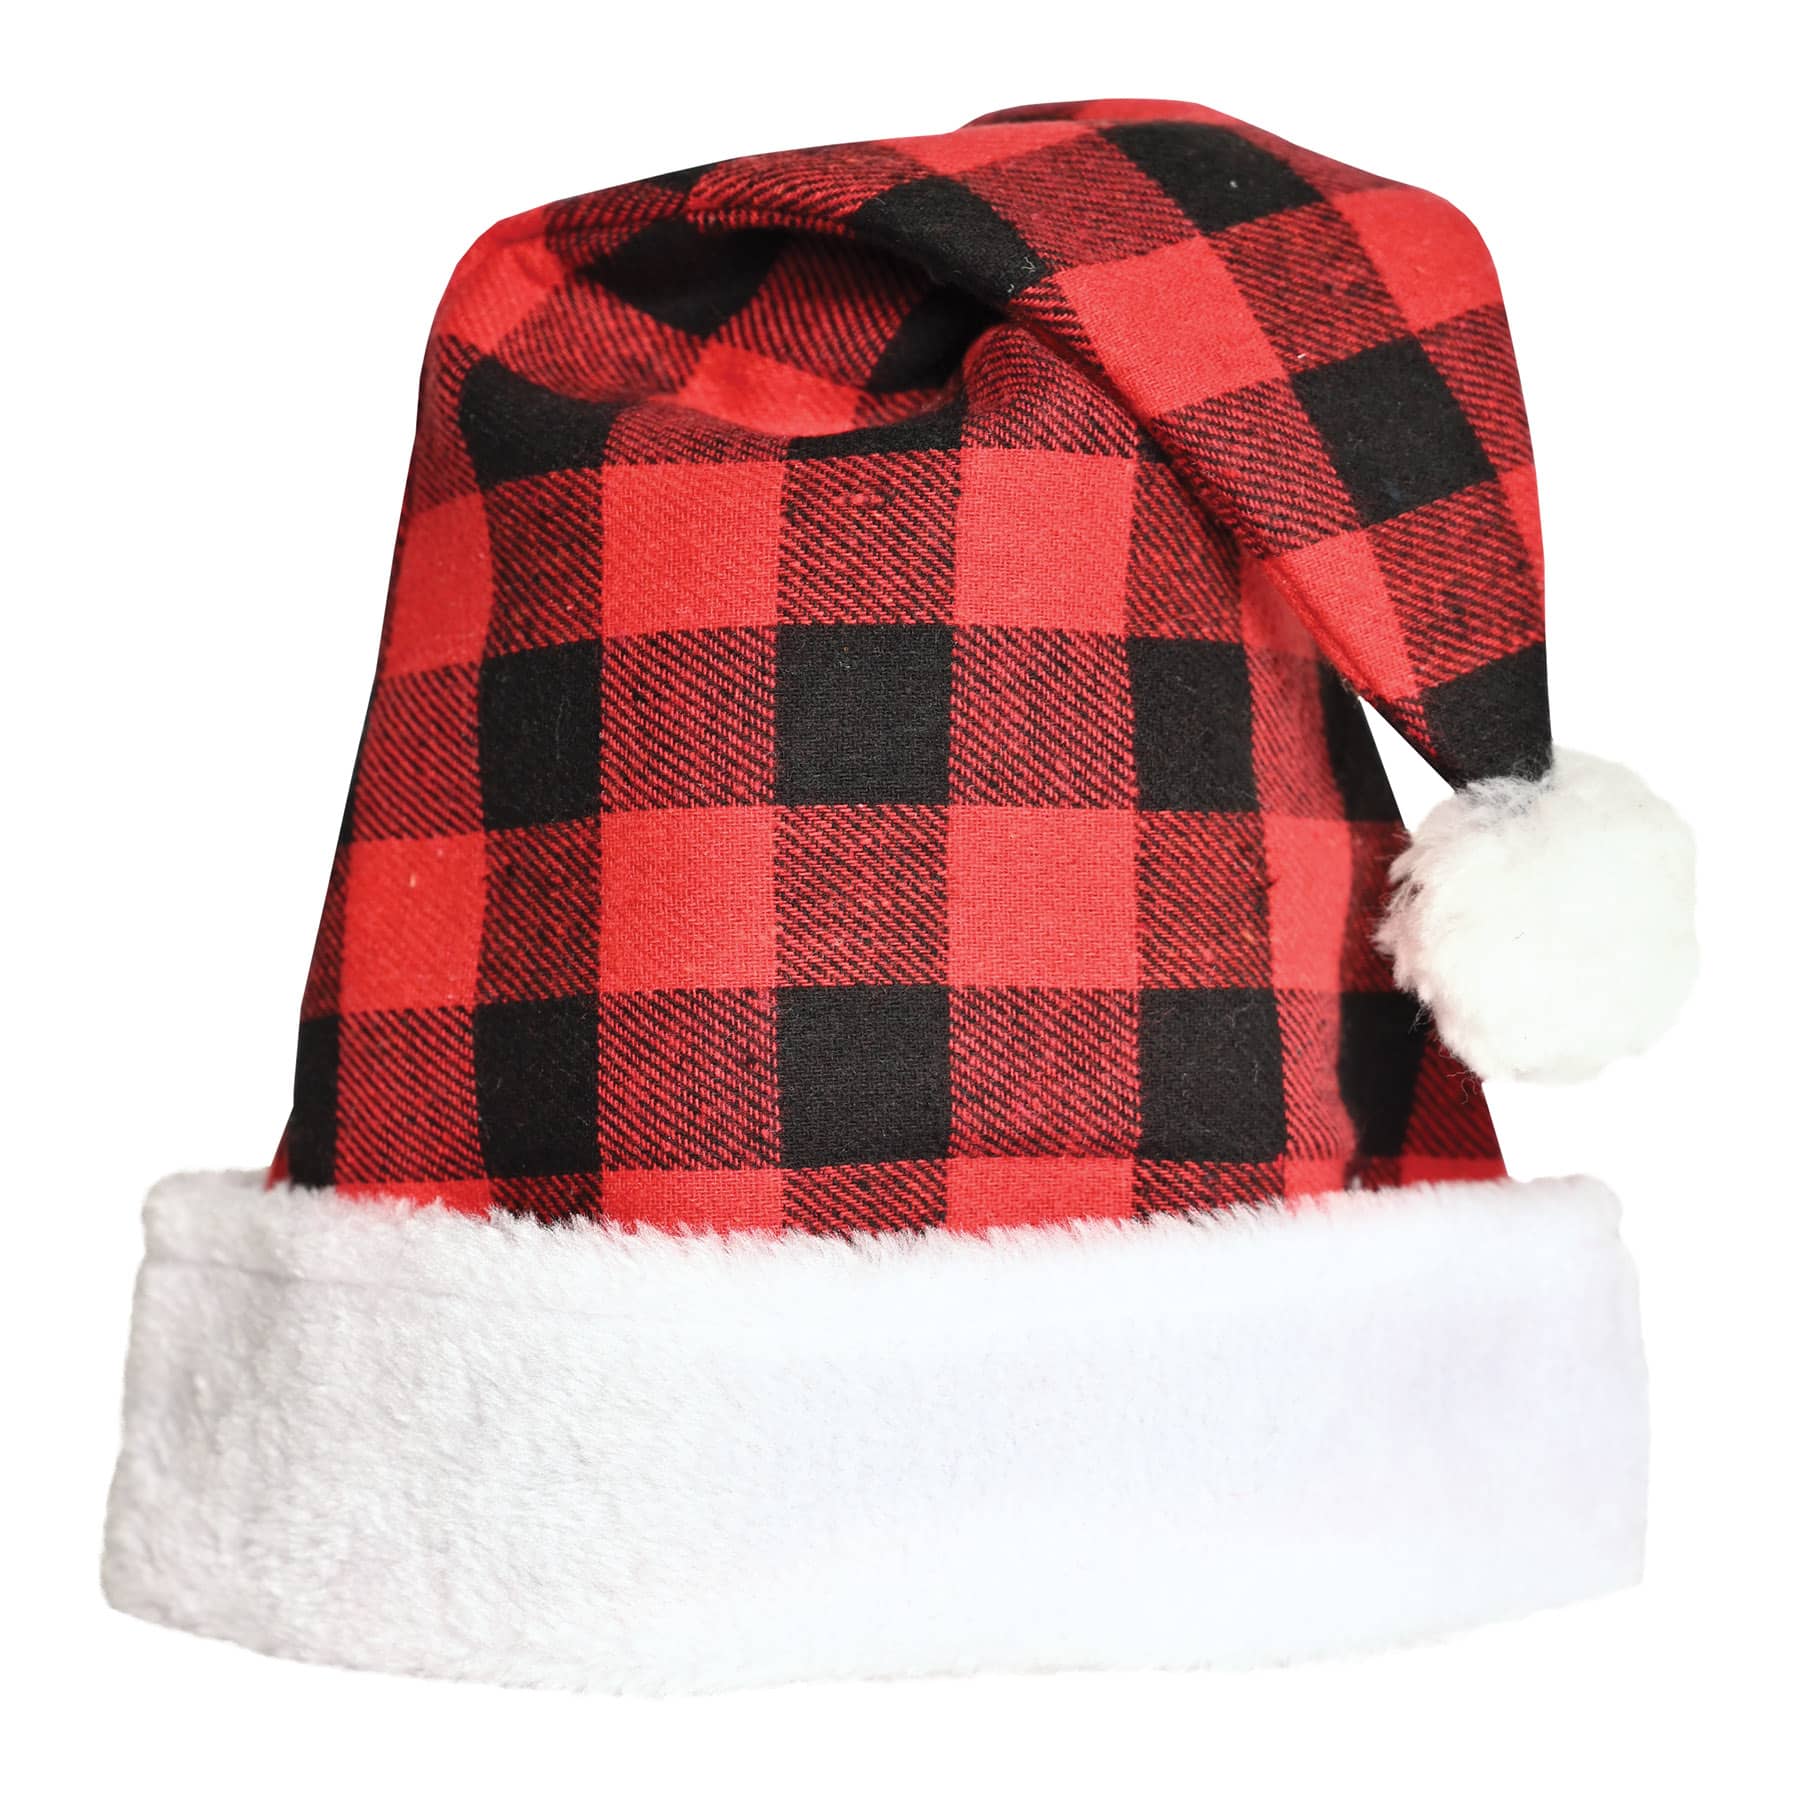 A traditional Santa hat made felt red and black plaid material with white plush trim.